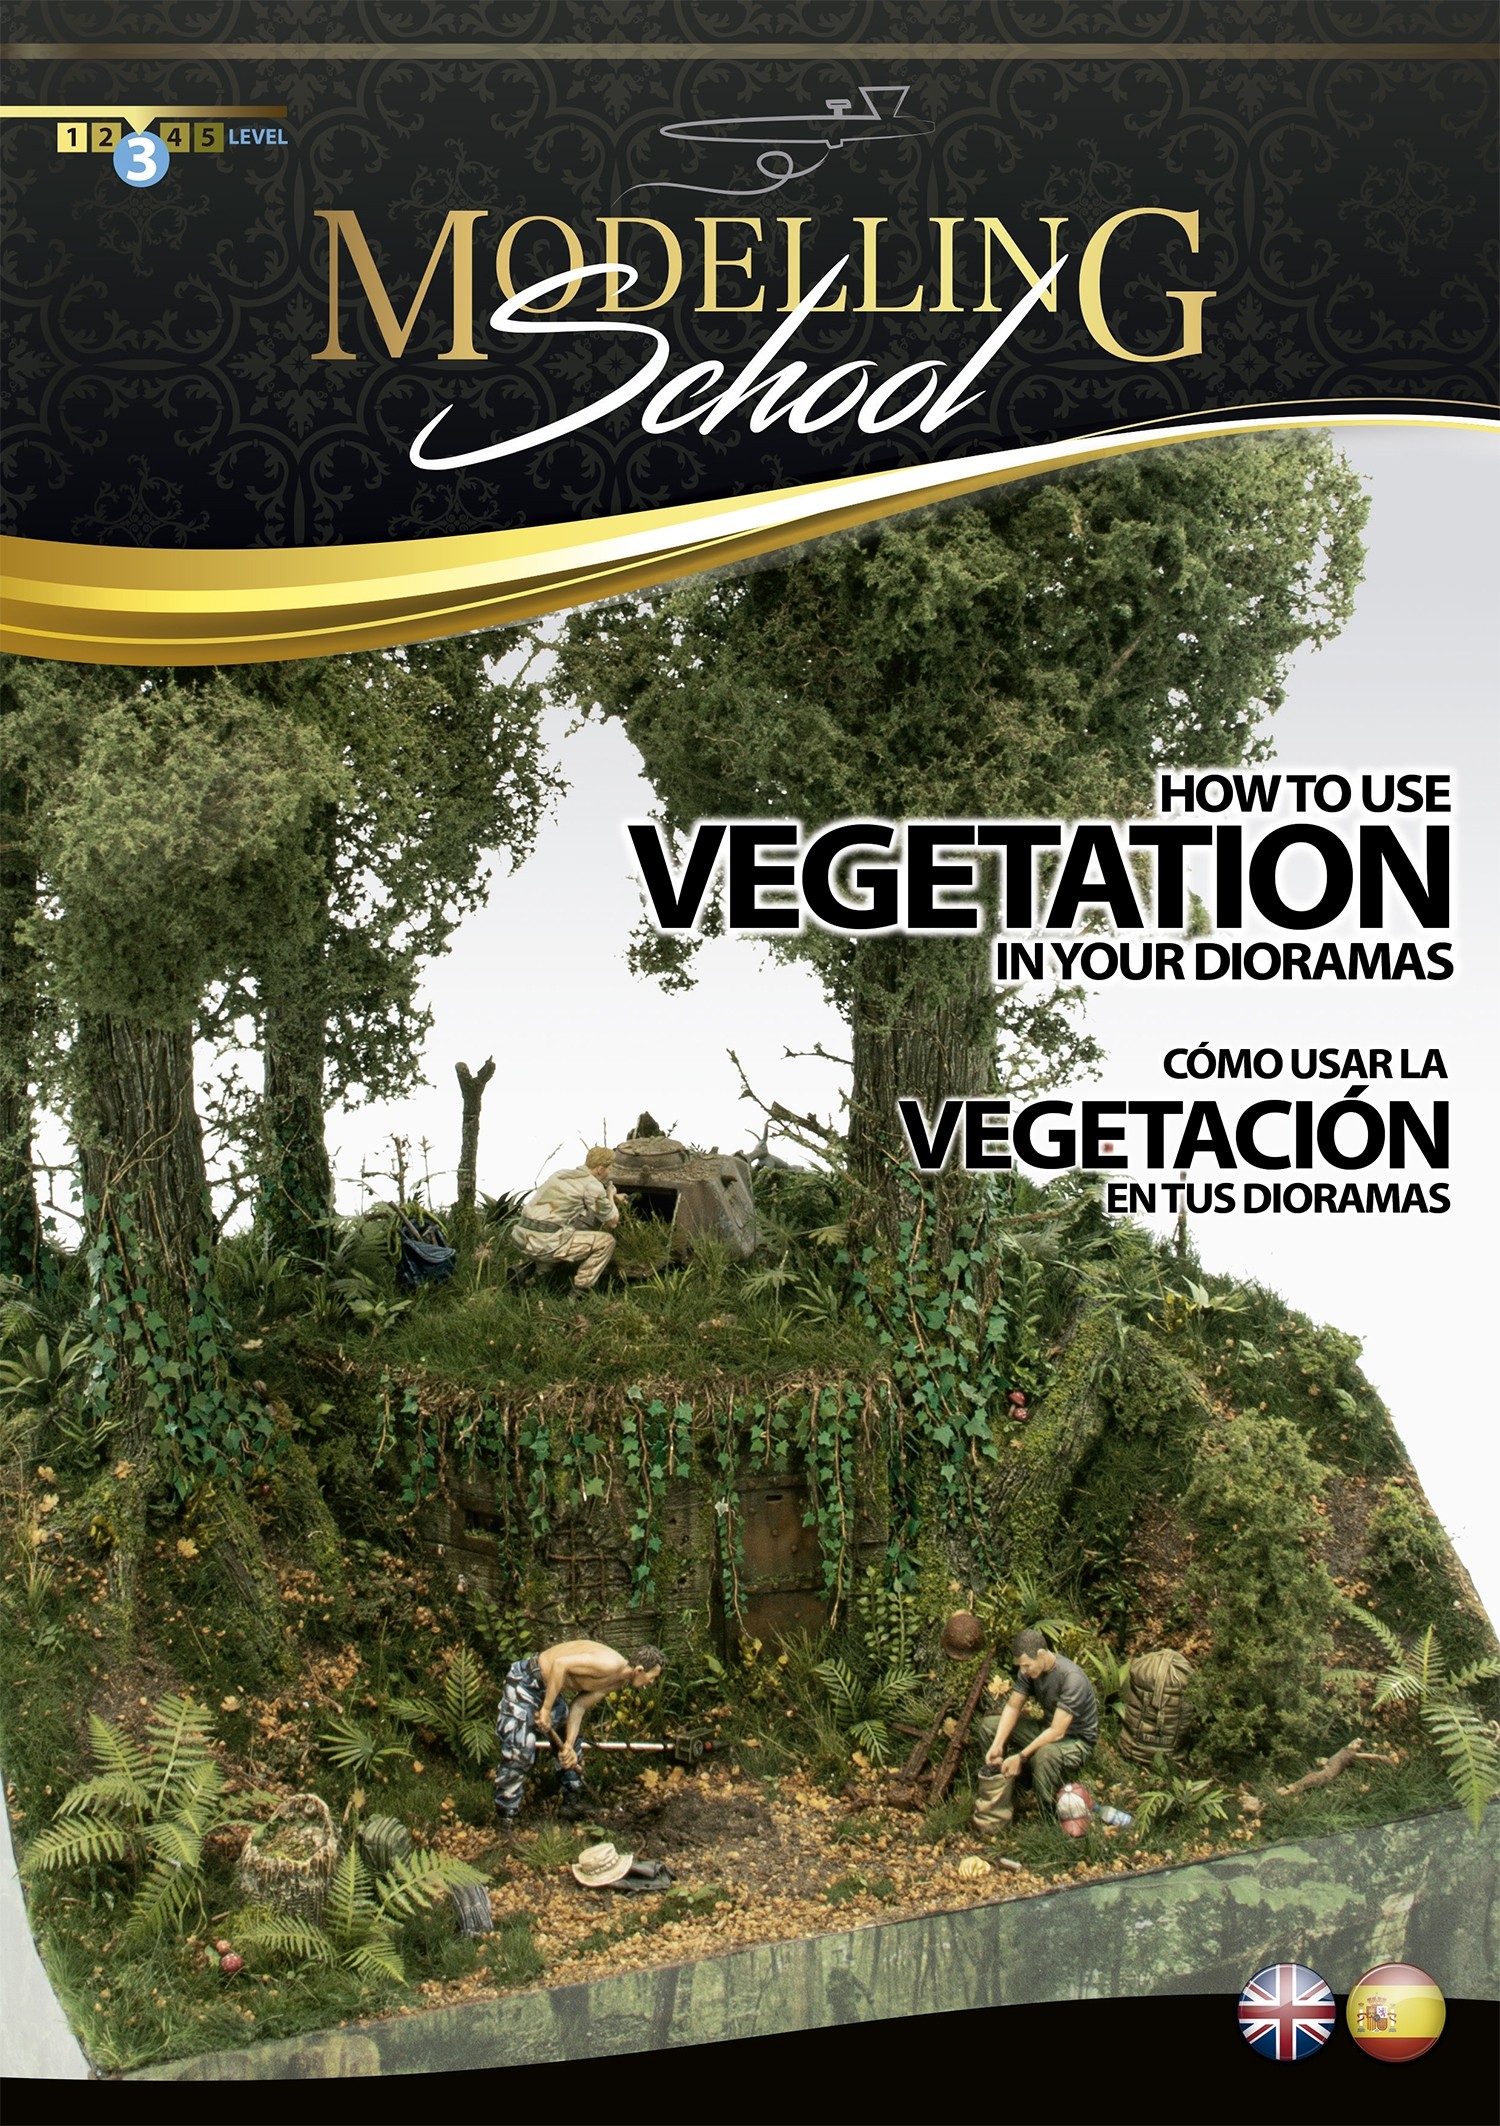 A.MIG-6254 - MODELLING SCHOOL - How to use Vegetation in your Dioramas (Multilingual)